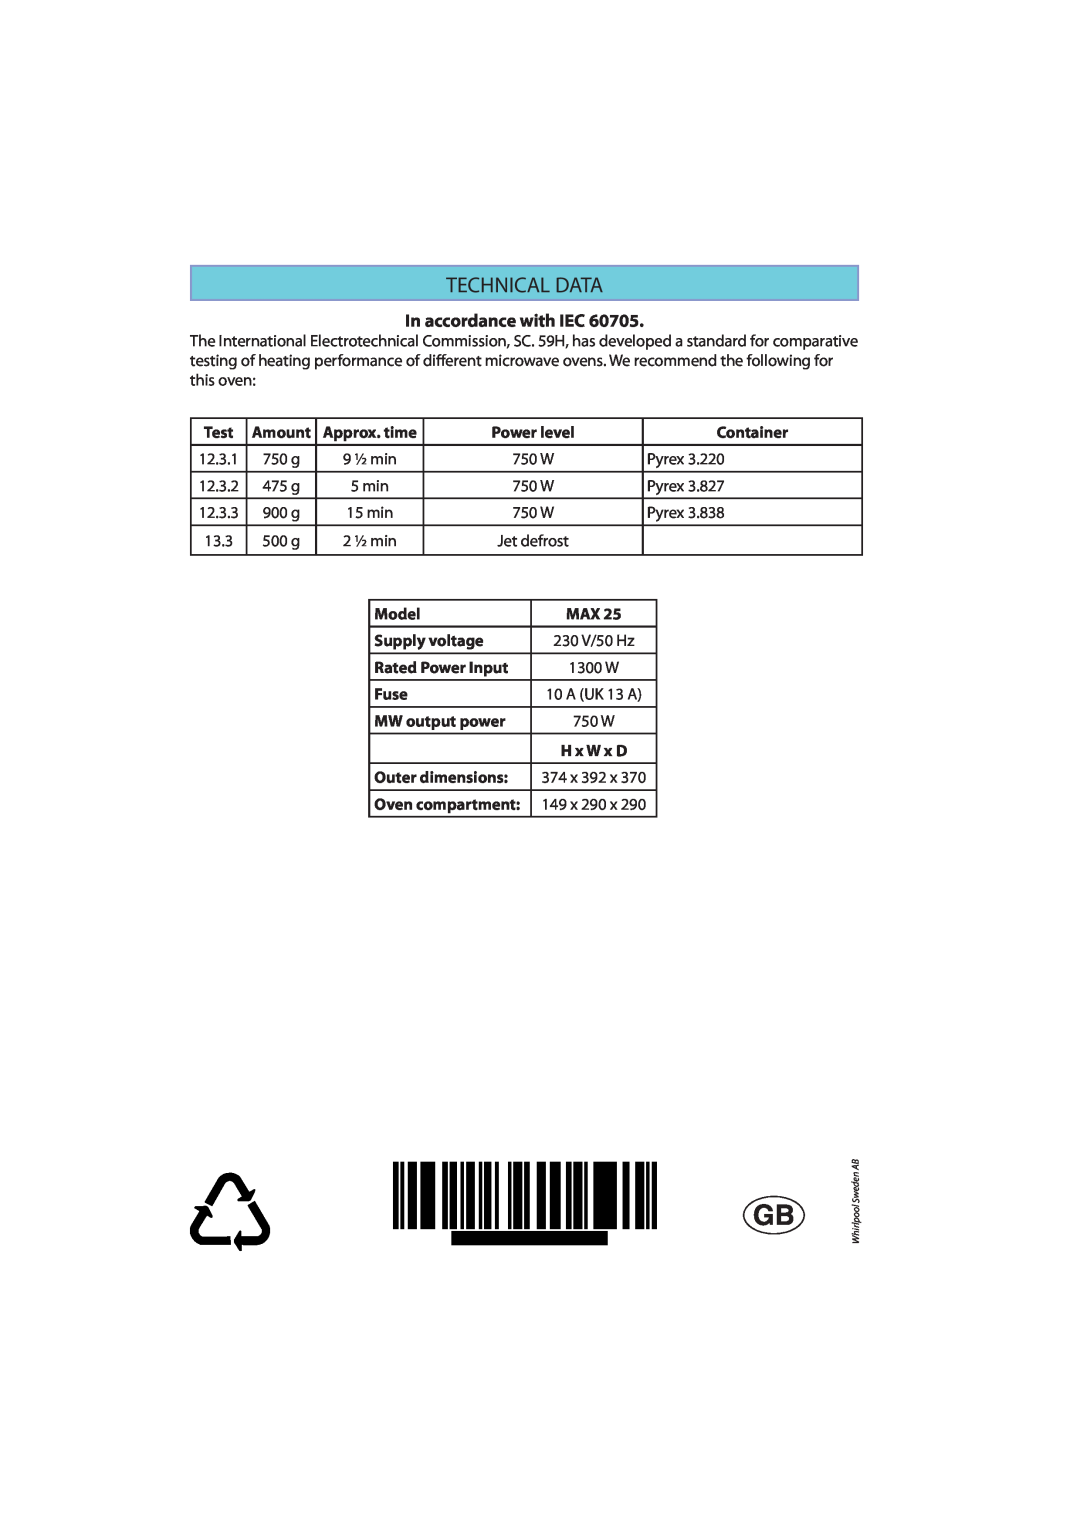 Whirlpool MAX 25 manual Technical Data, In accordance with IEC 